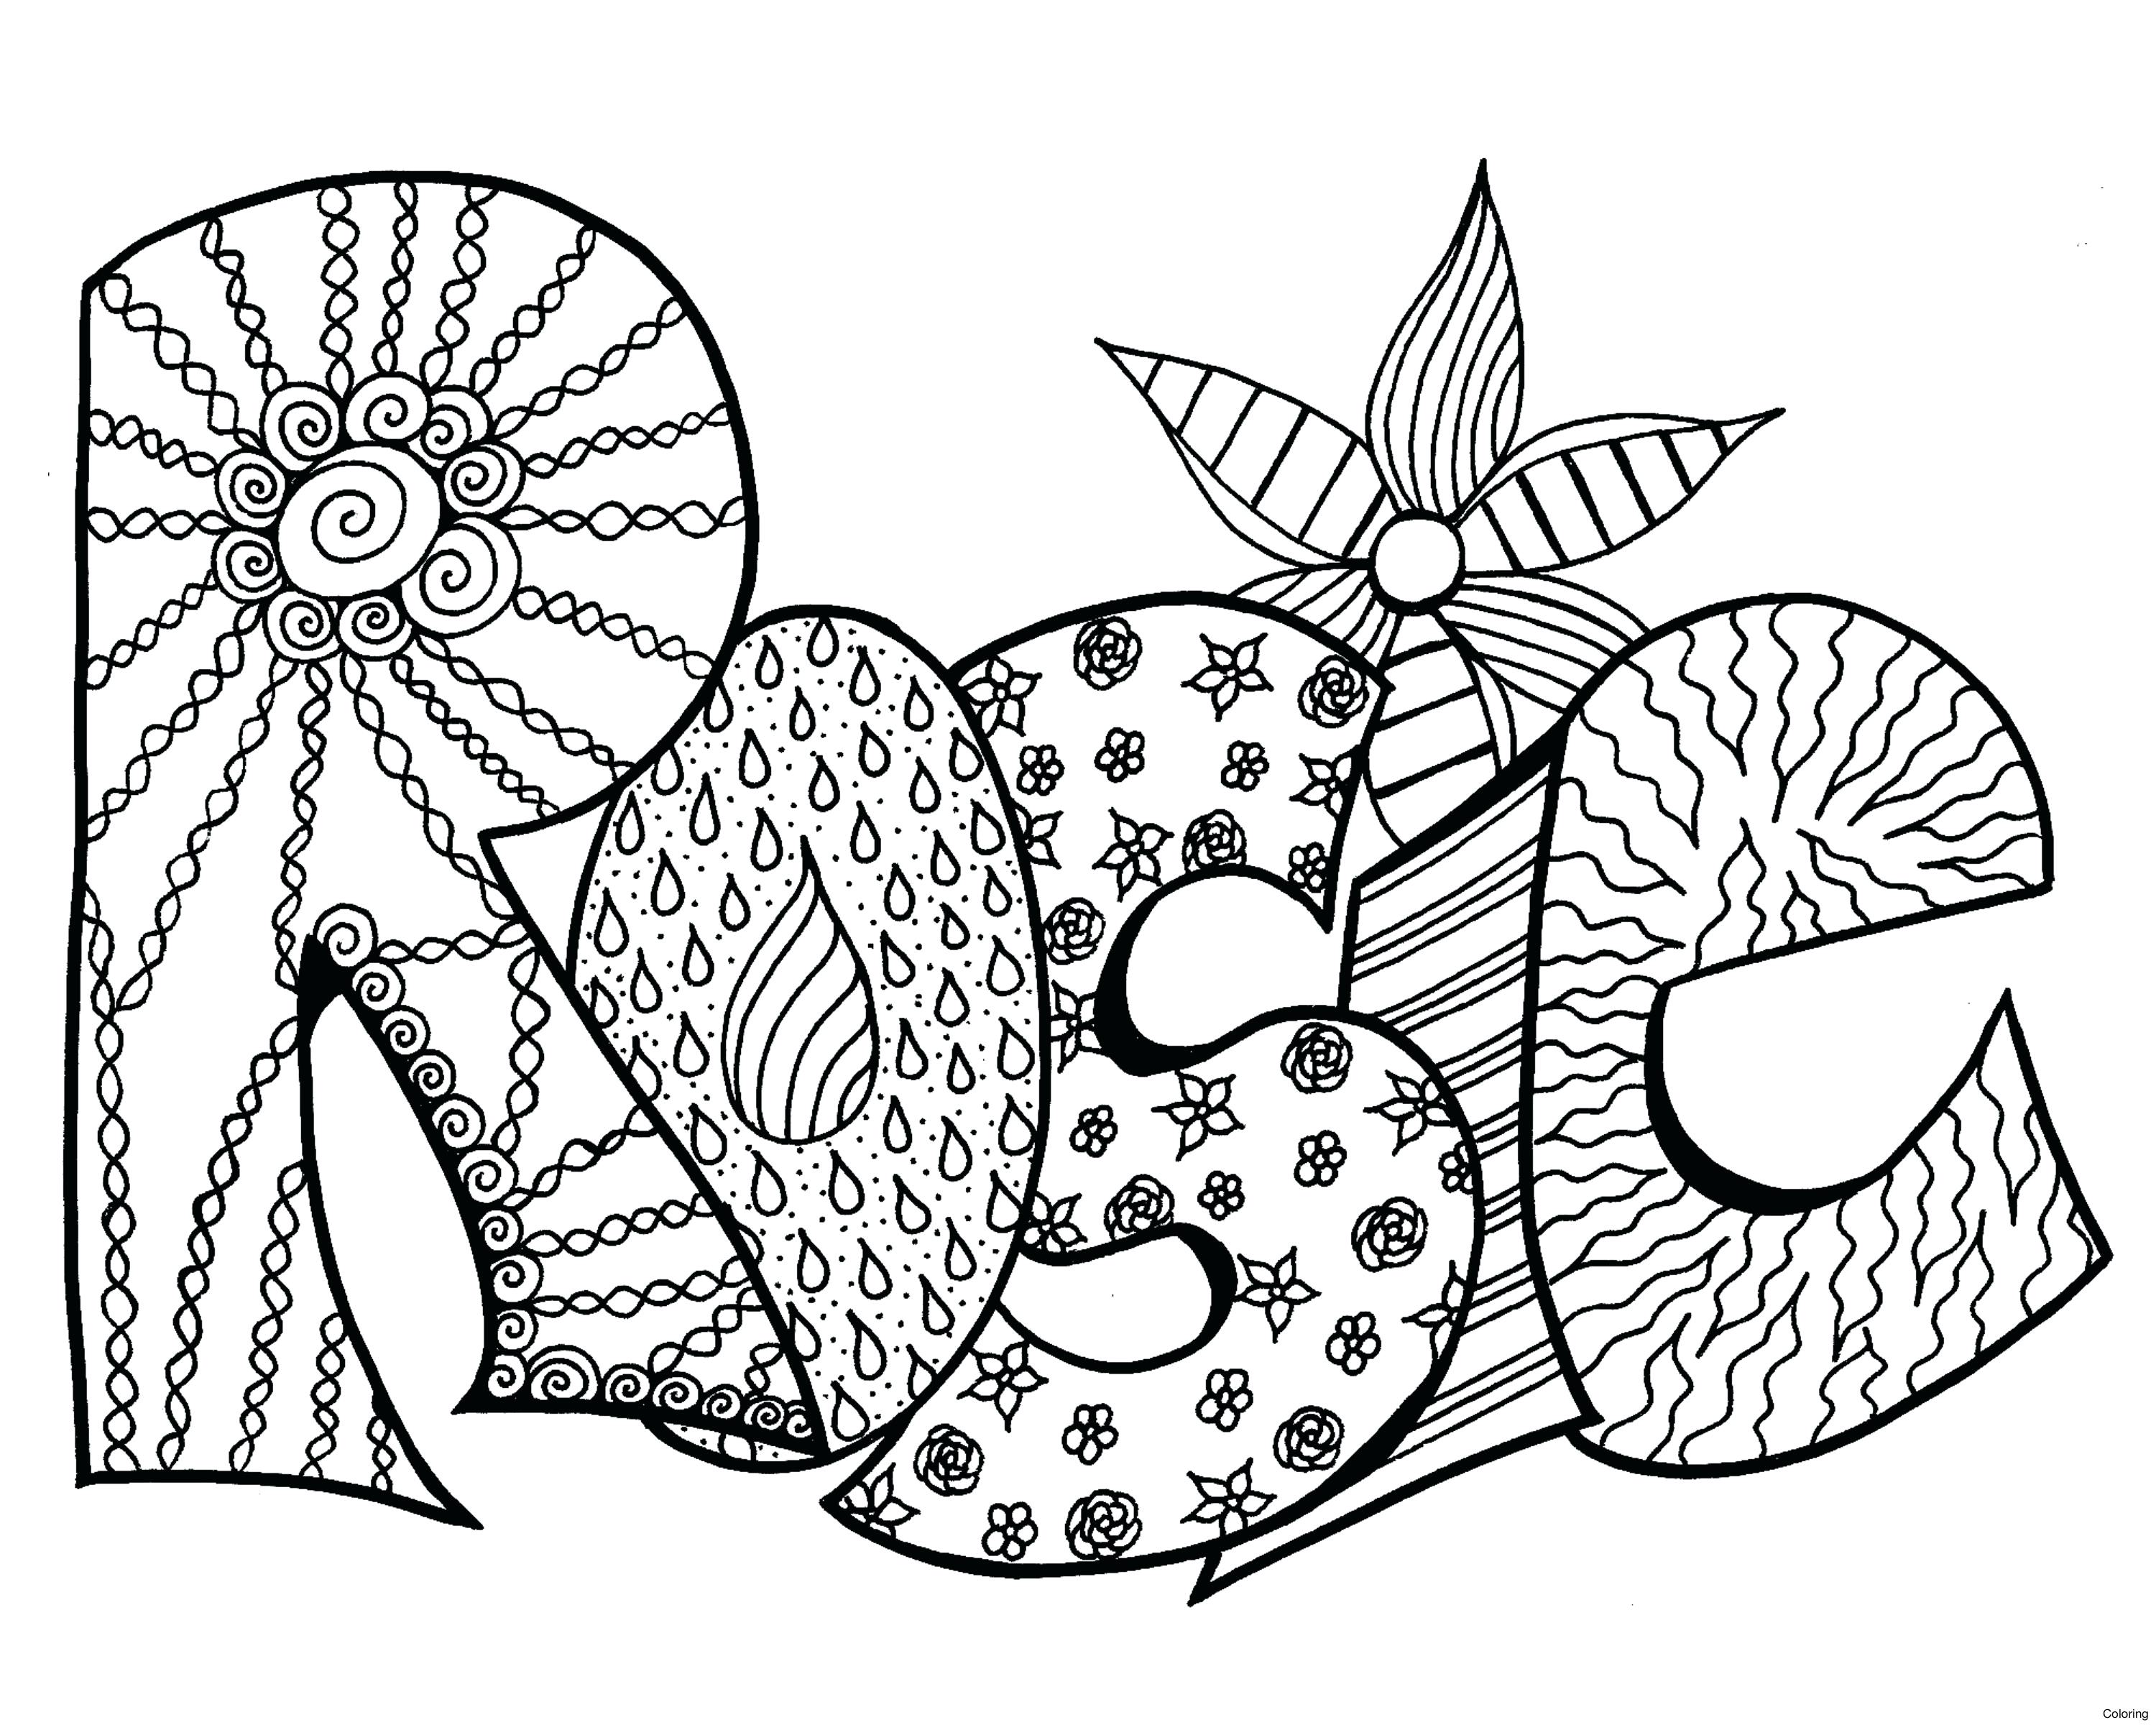 Customized Coloring Pages With Names On It at GetDrawings Free download